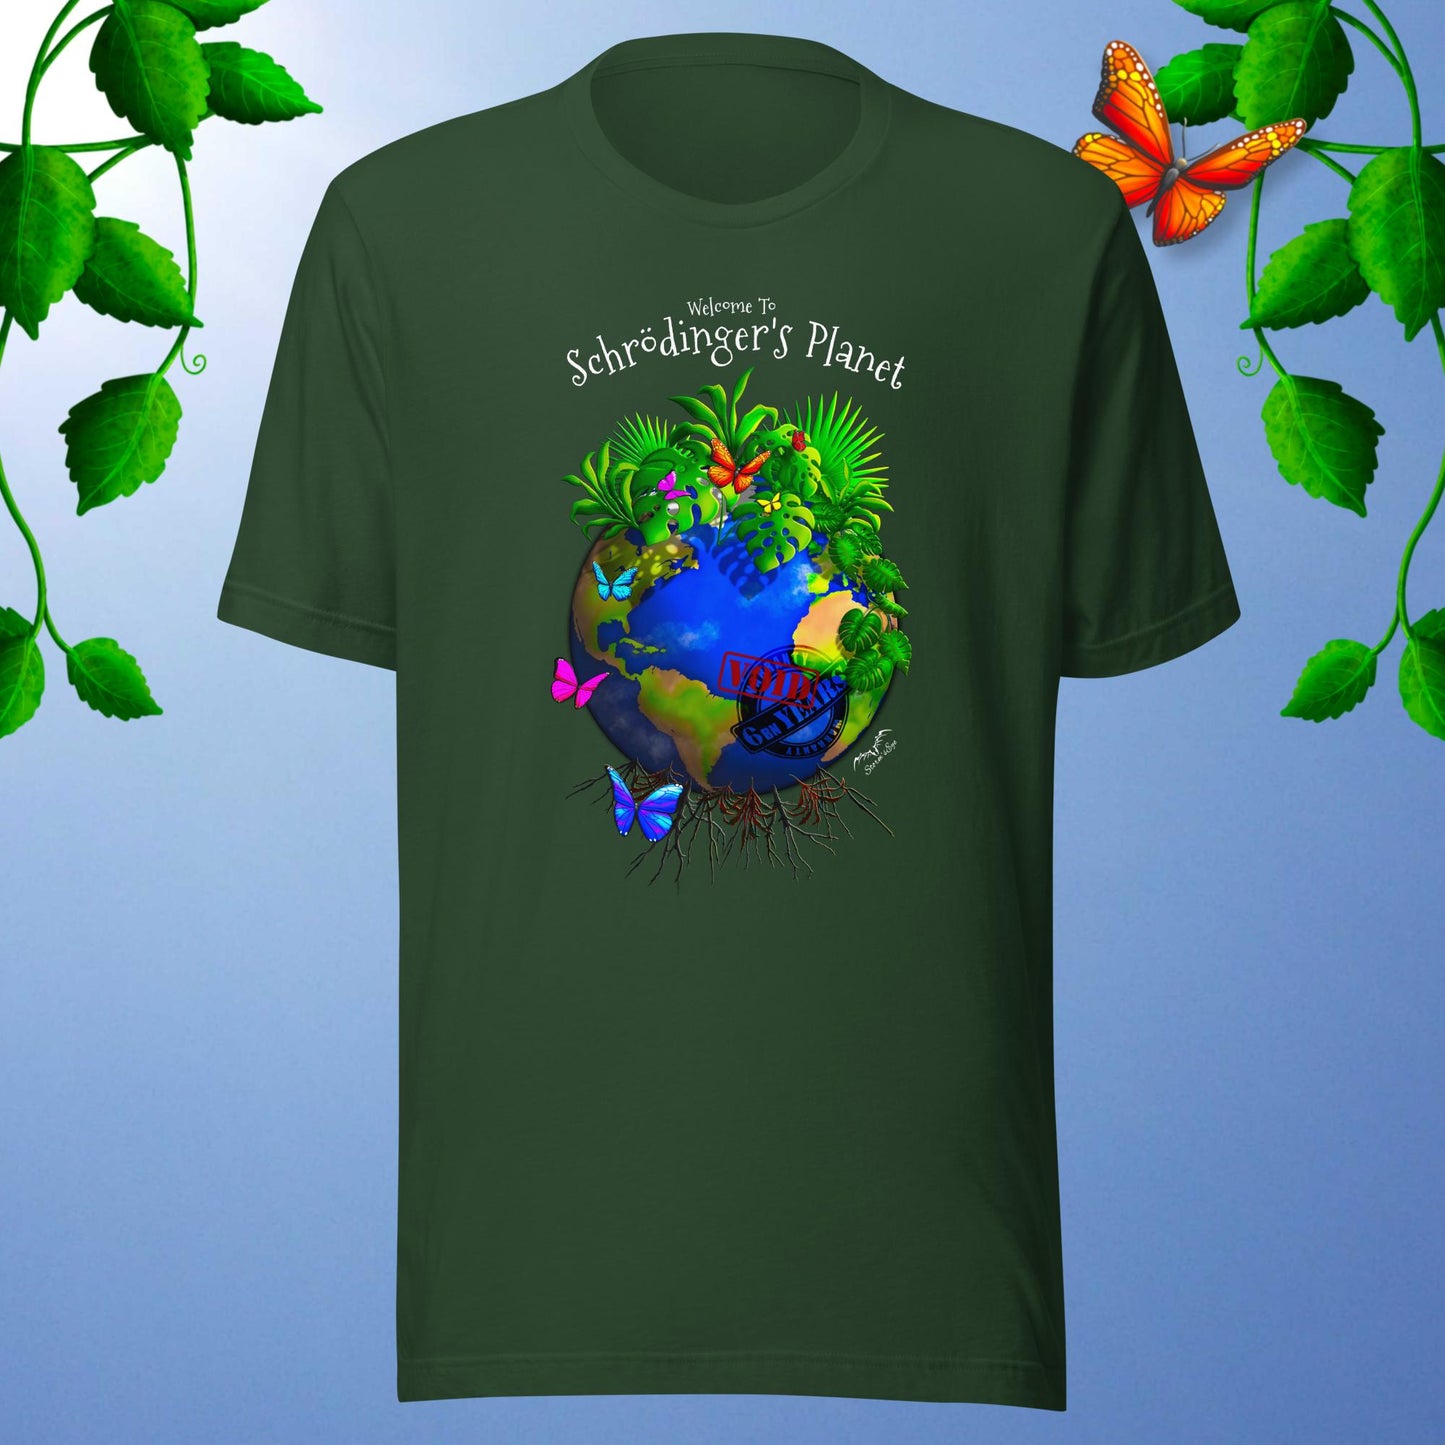 Climate Change Green Planet T-shirt forest green by stormseye design